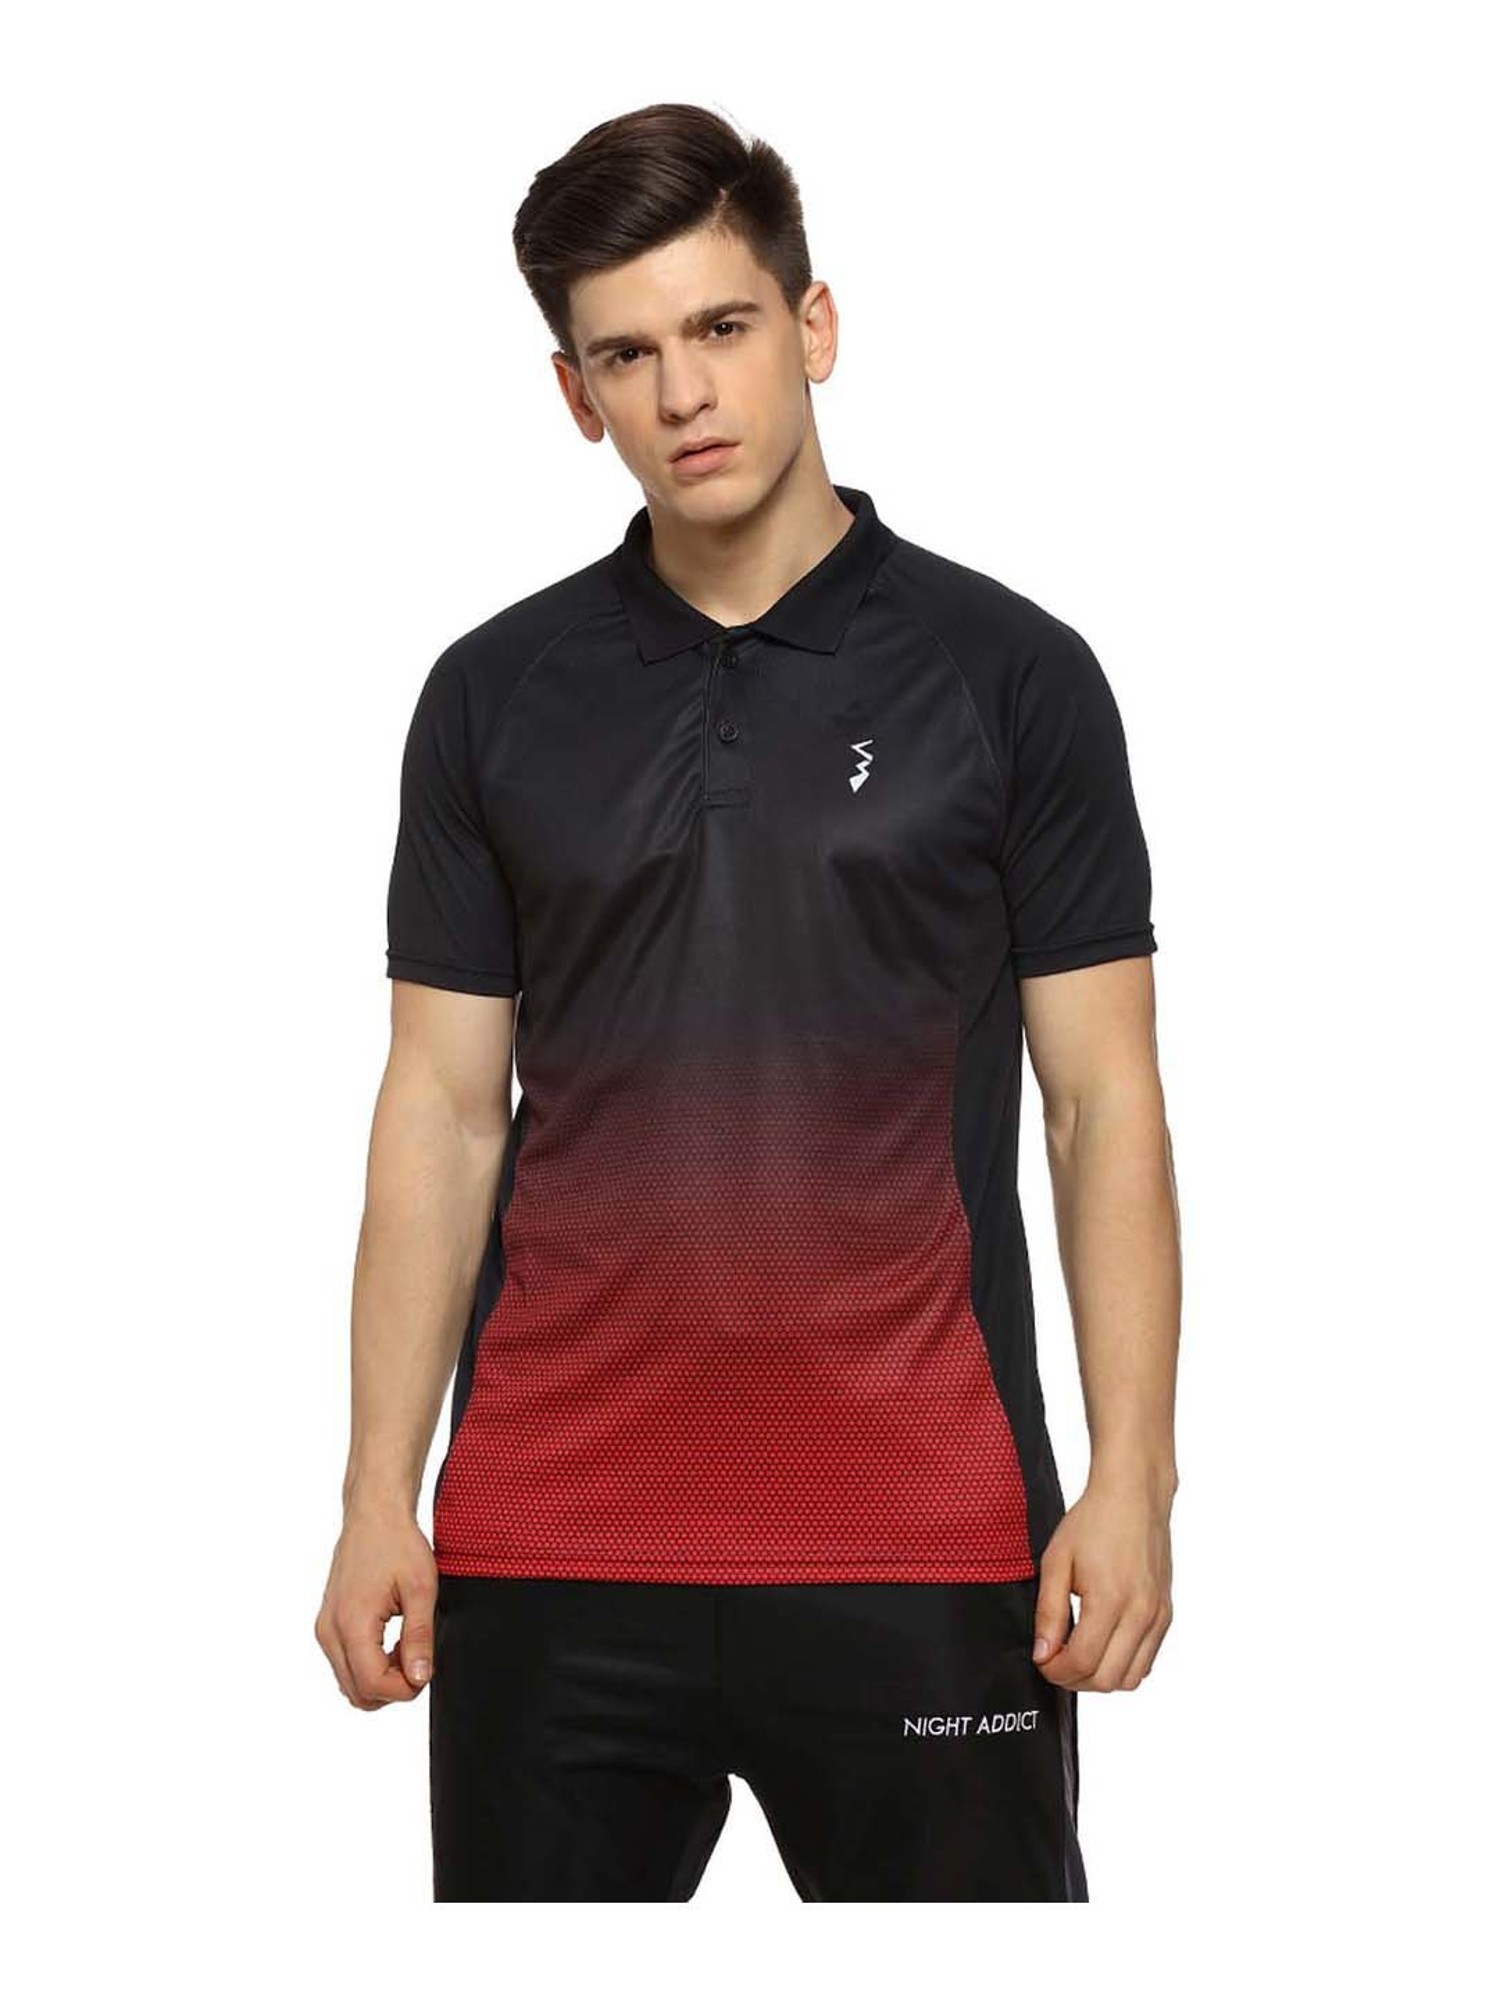 black and red polo t shirt